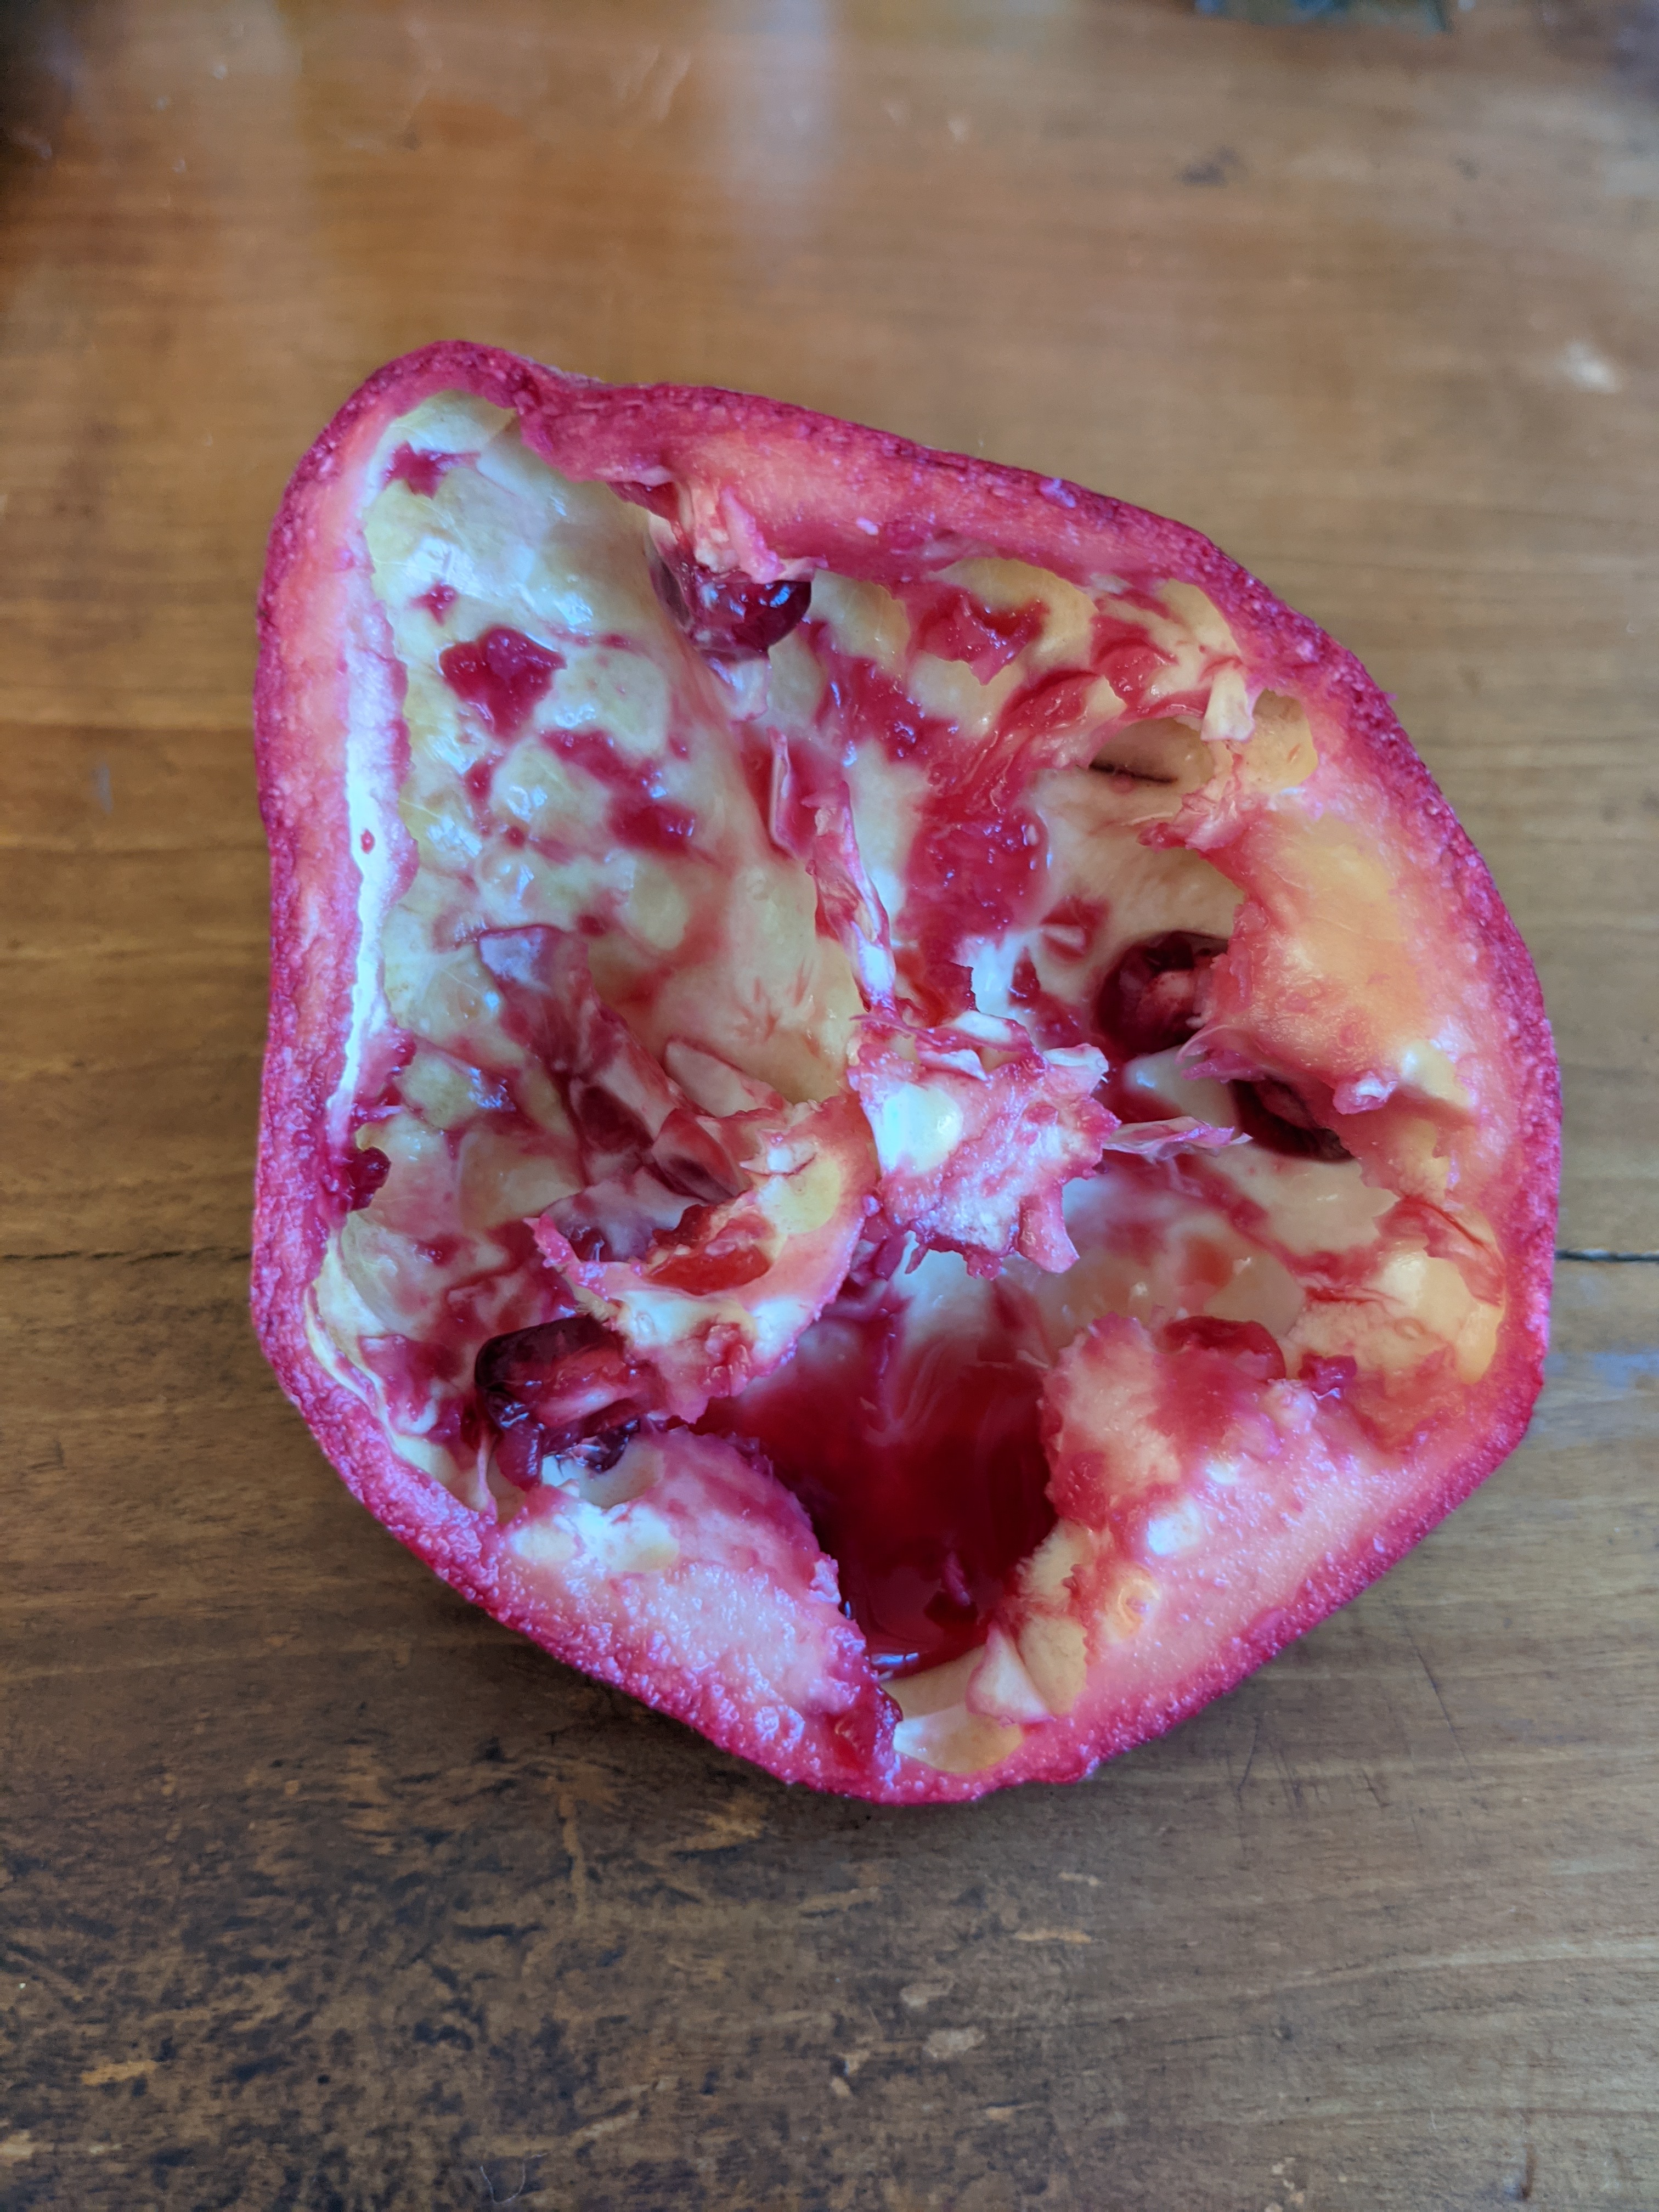 A hollowed out pomegranate, with a pool of red-pink juice at the bottom of the skin.